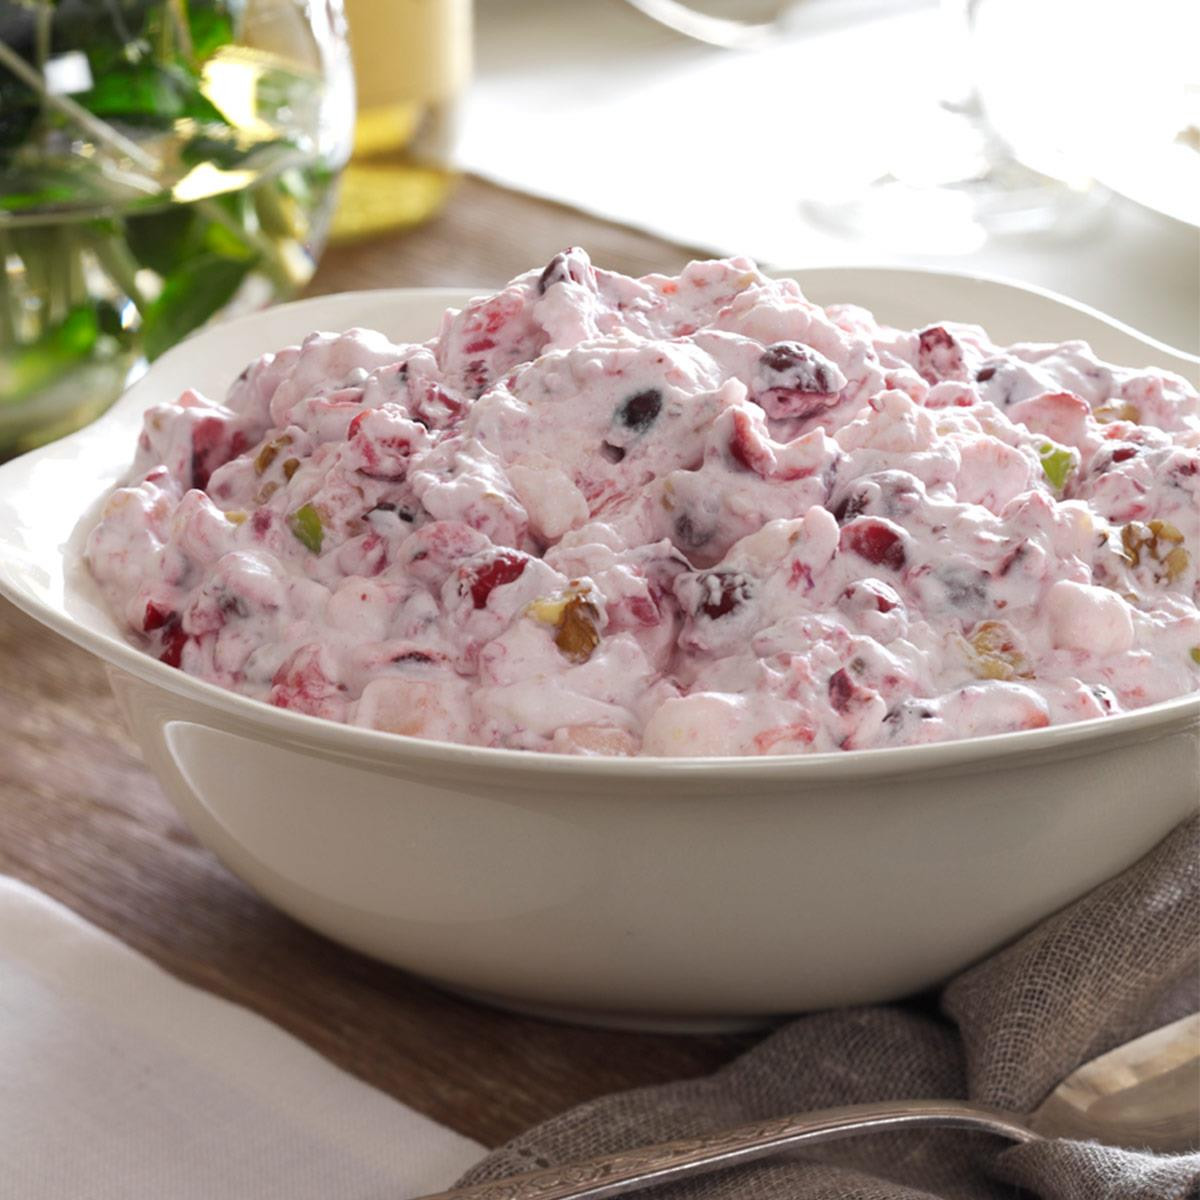 Cranberry Salad Recipes For Thanksgiving
 Creamy Cranberry Salad Recipe